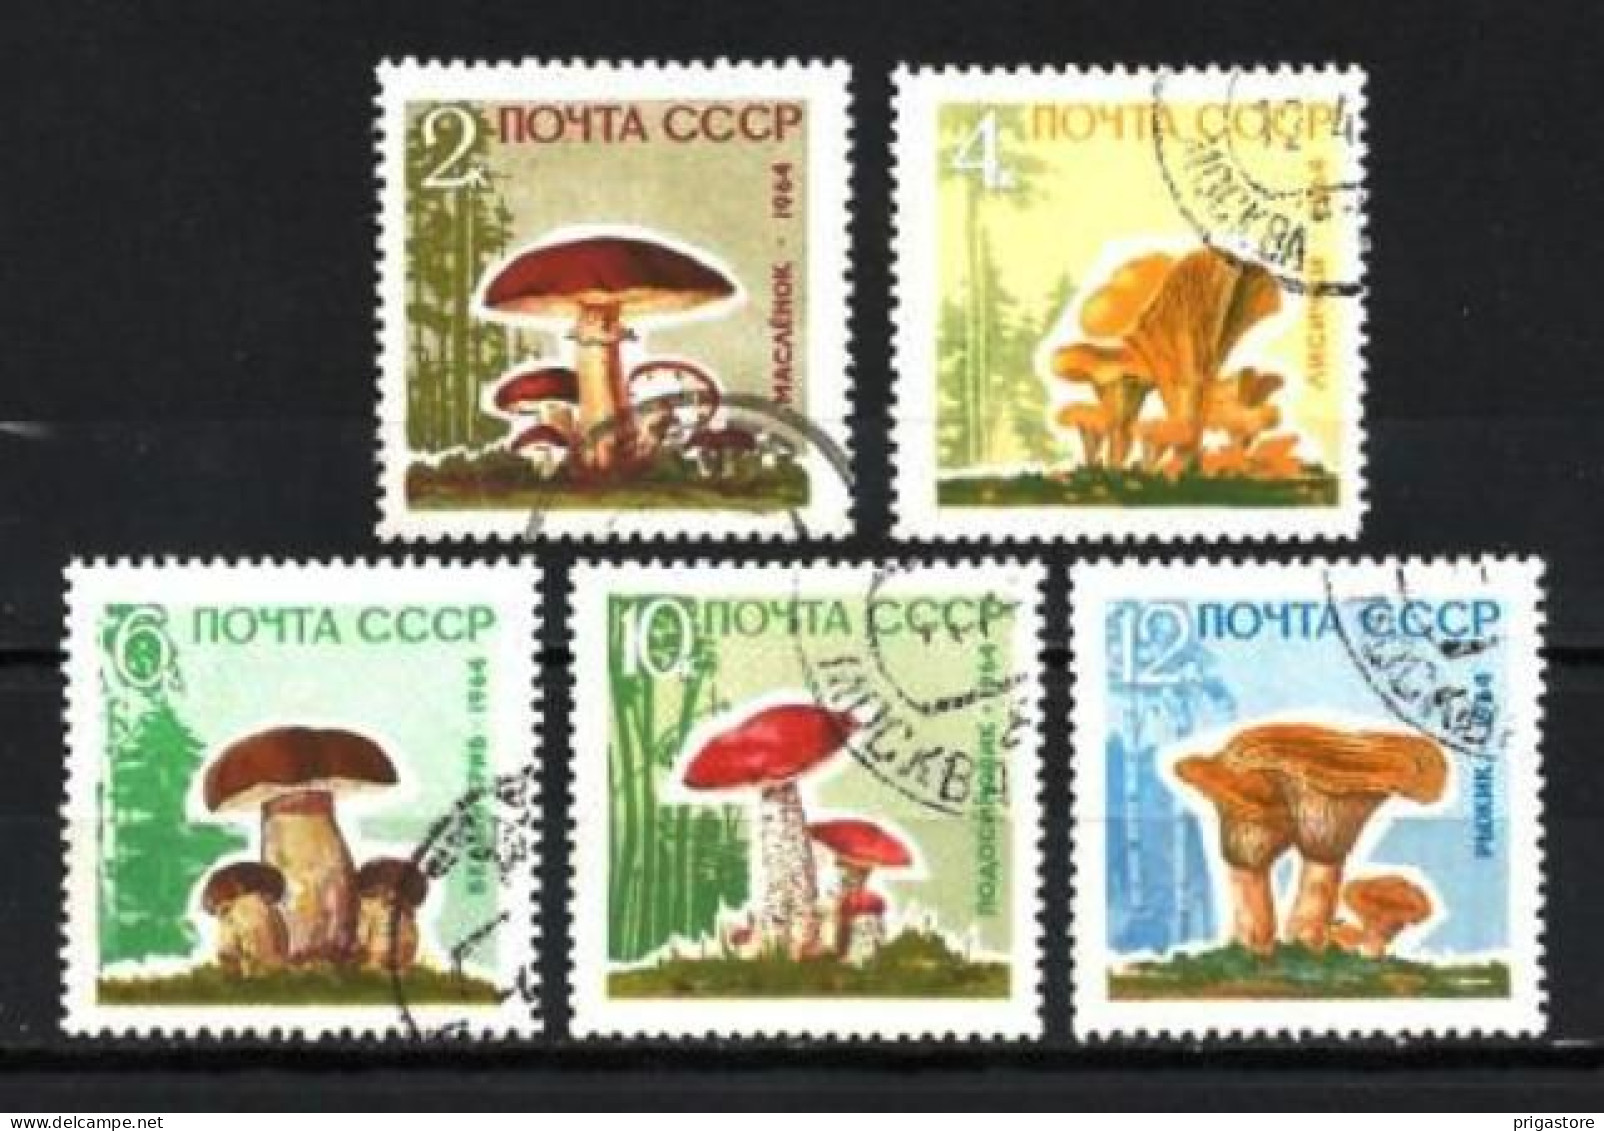 Russie URSS 1964 Champignons (26) Yvert N° 2880 à 2884 Oblitérés Used - Used Stamps